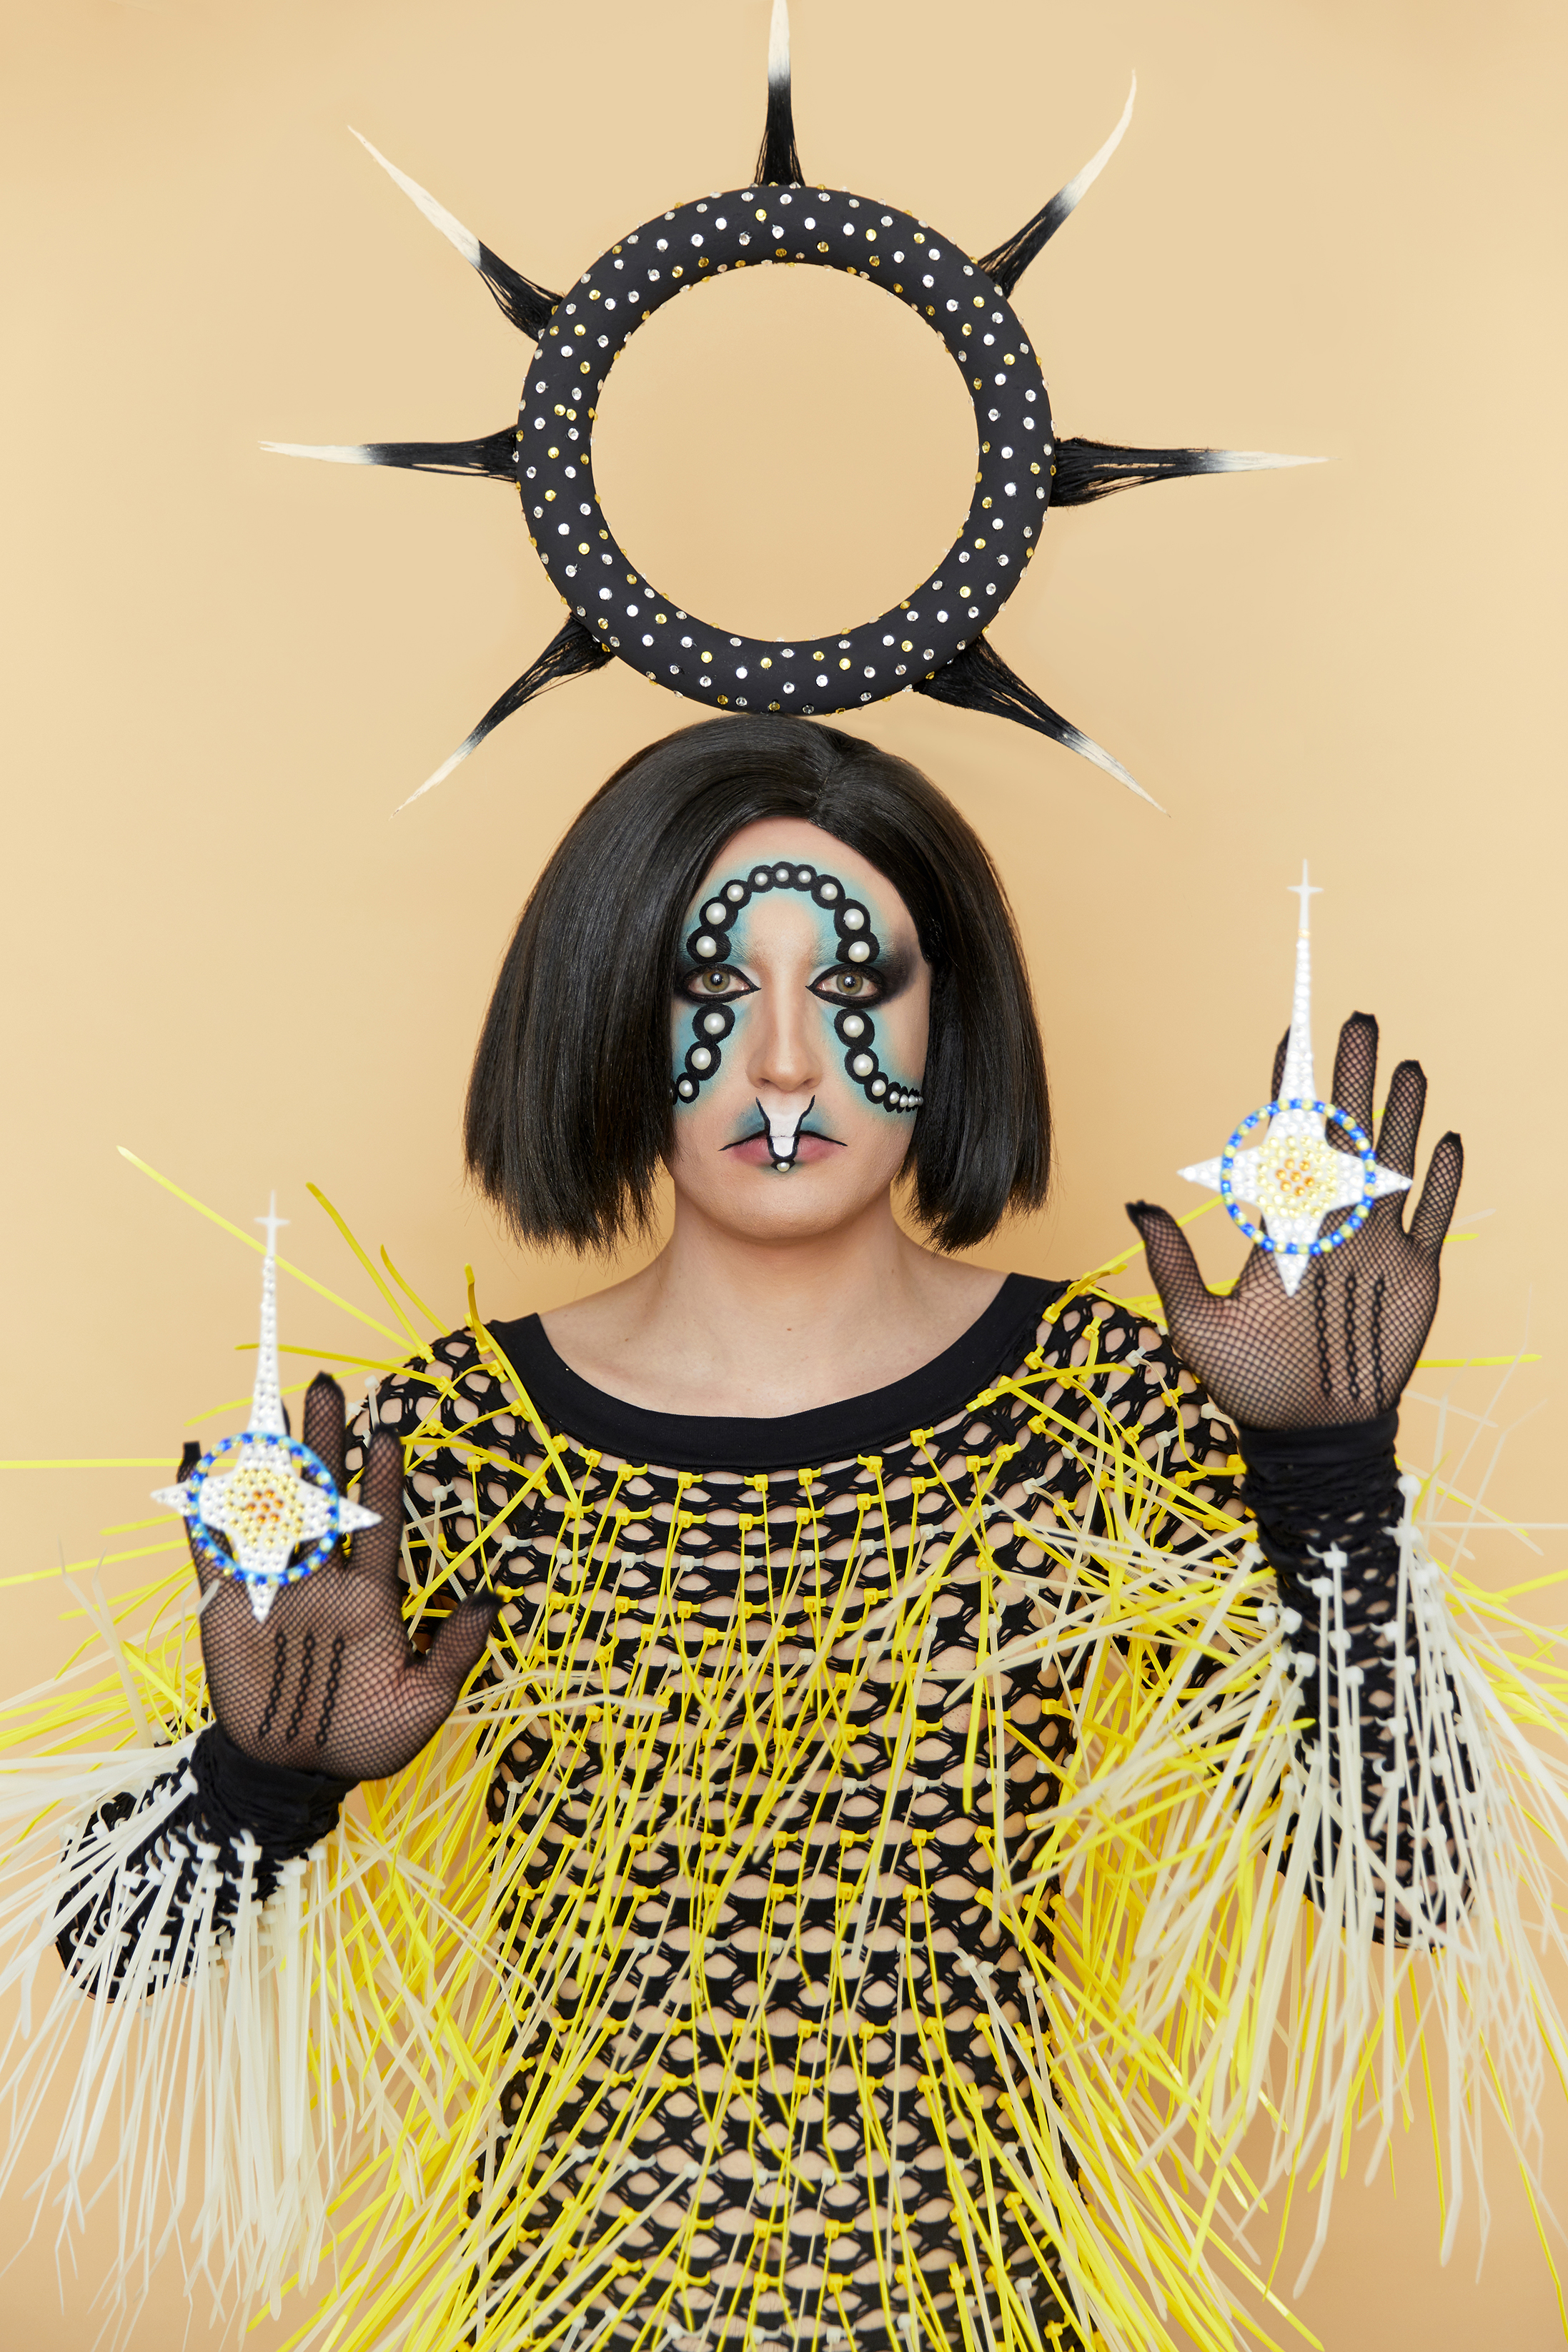 Jesse facing the camera waering a graphic makeup look with an ornate headpiece and black fishnet top covered in yellow and white spikes against a tan background